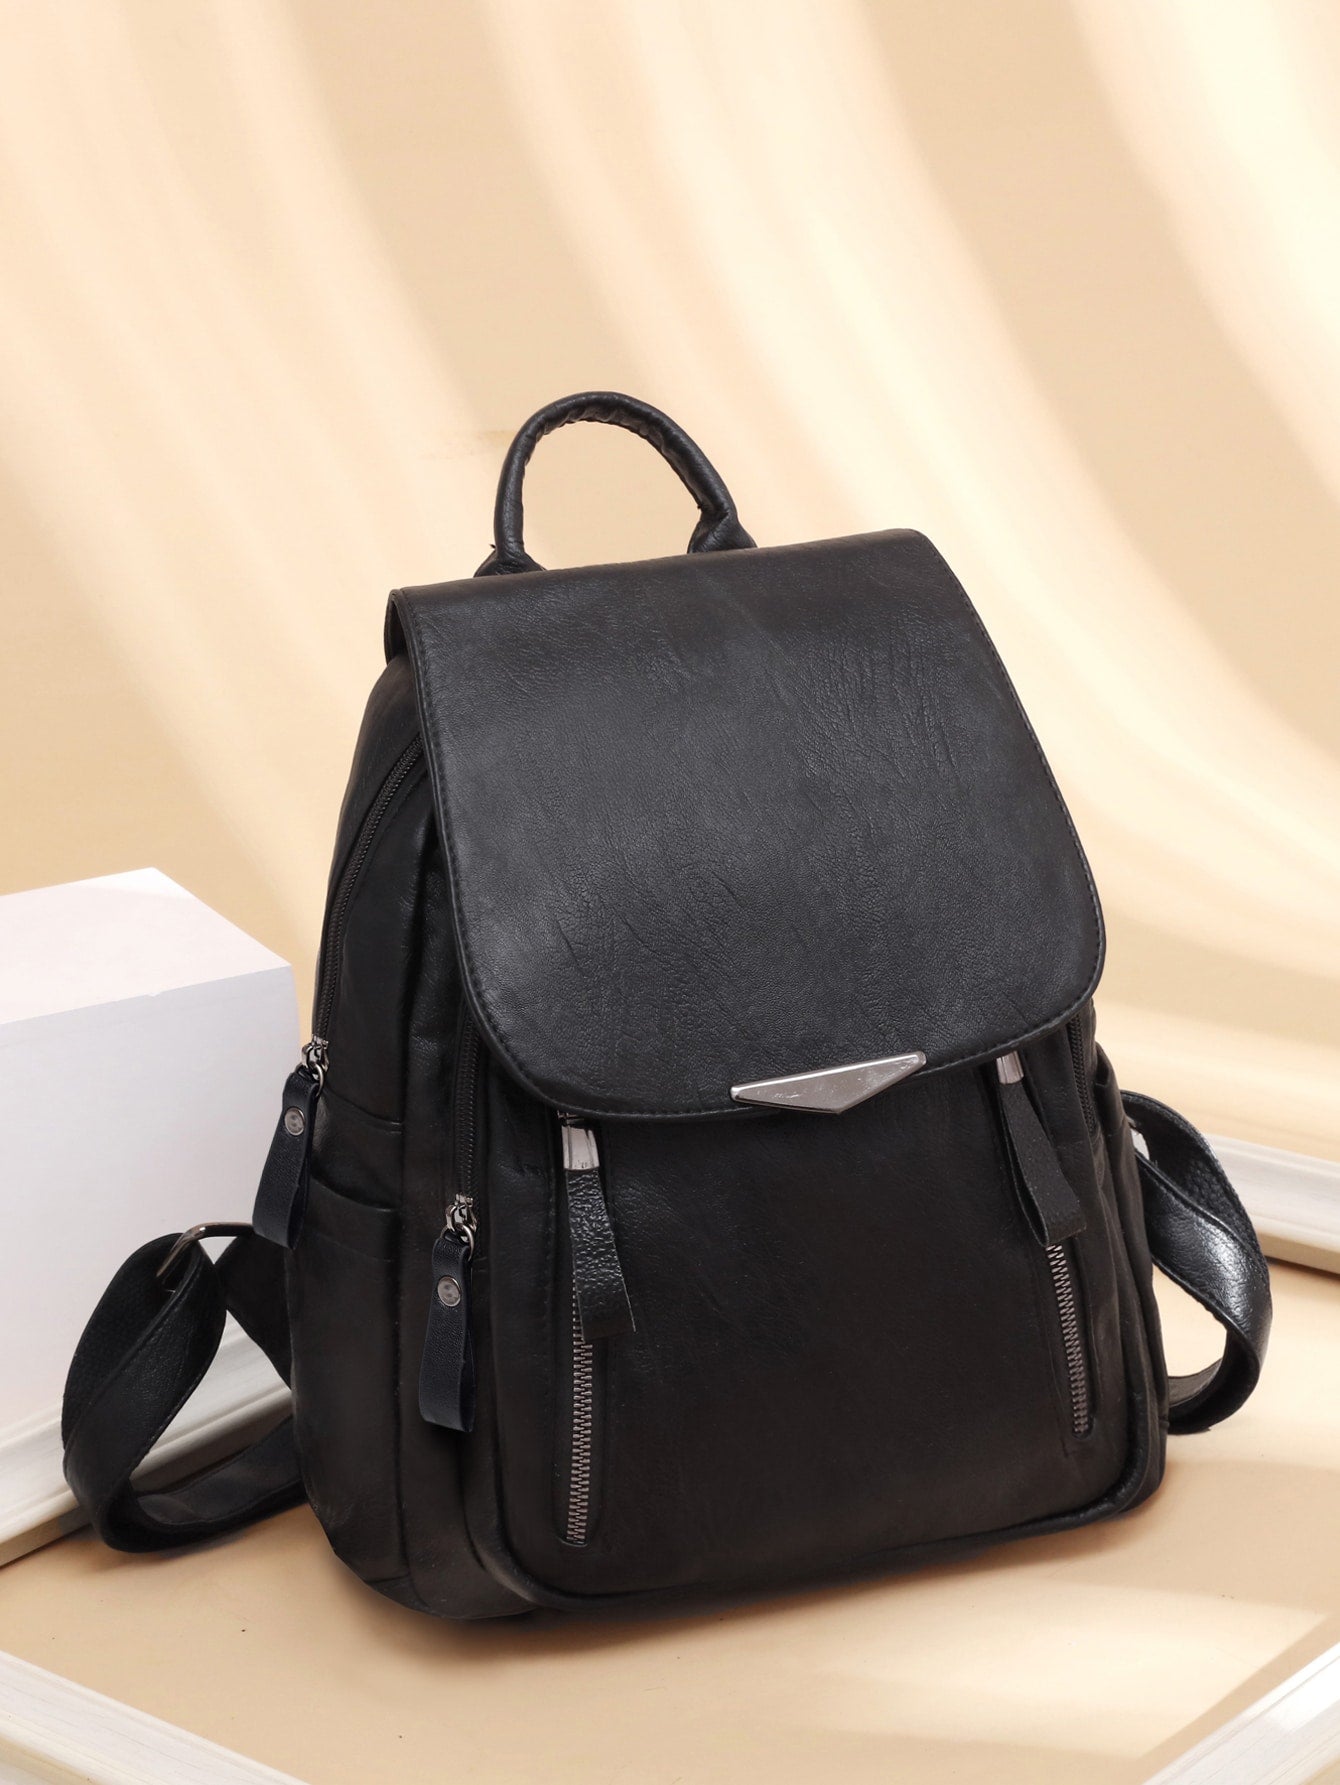 Dual Zip Front Flap Backpack